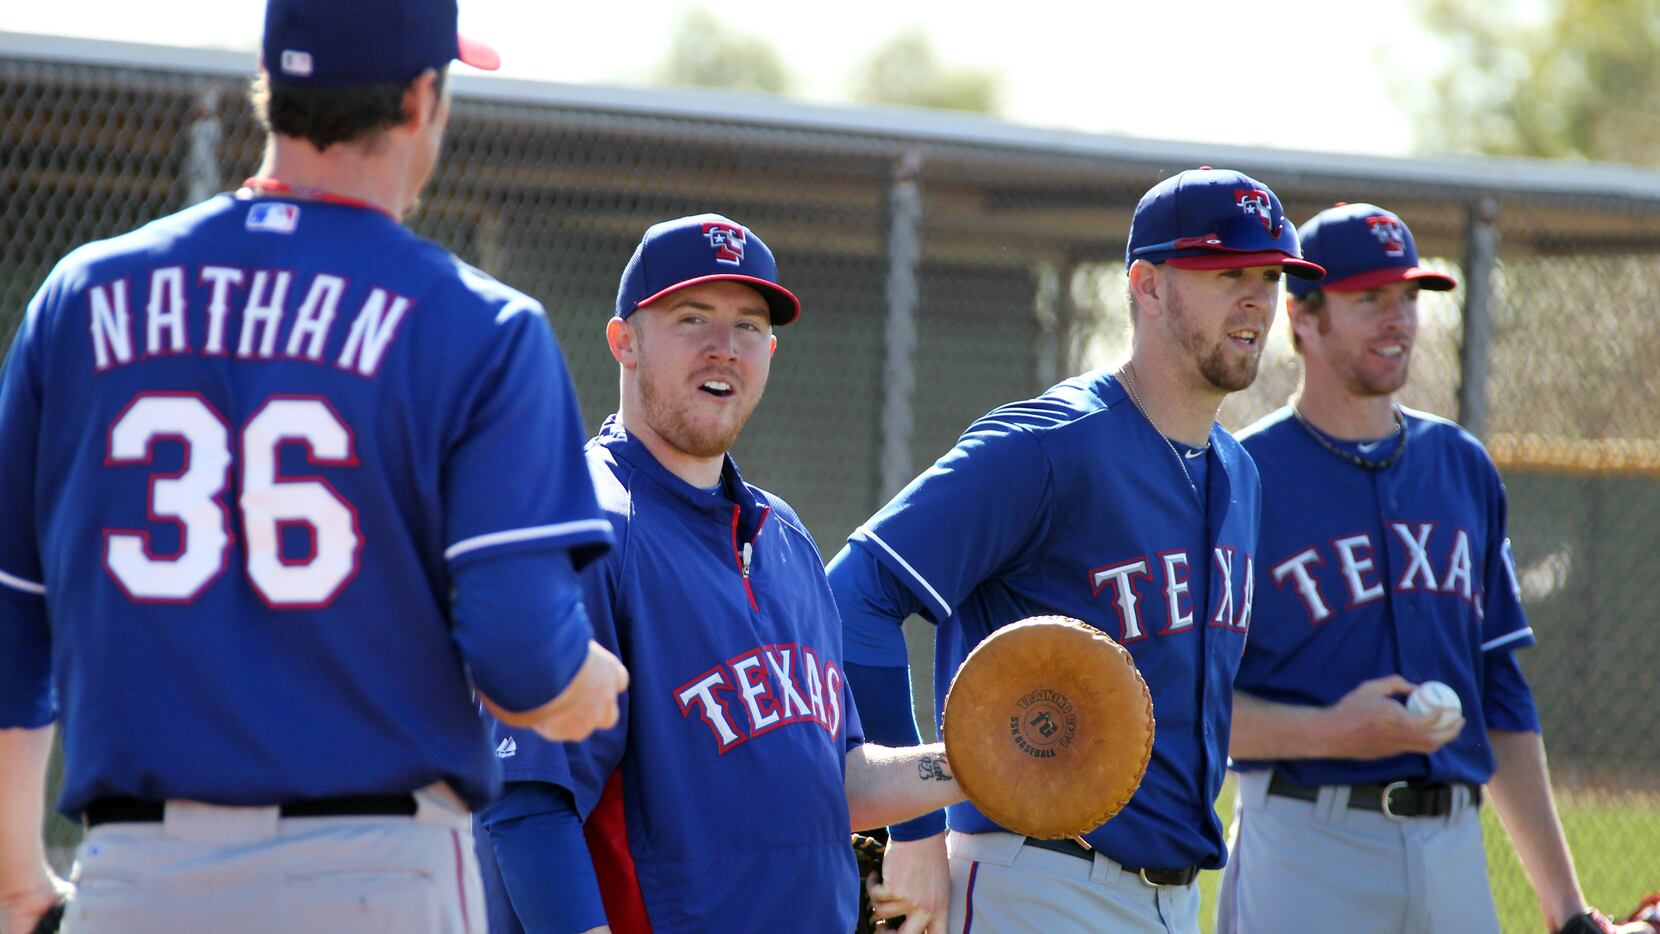 Rangers fans boo Josh Hamilton, who could be moving on